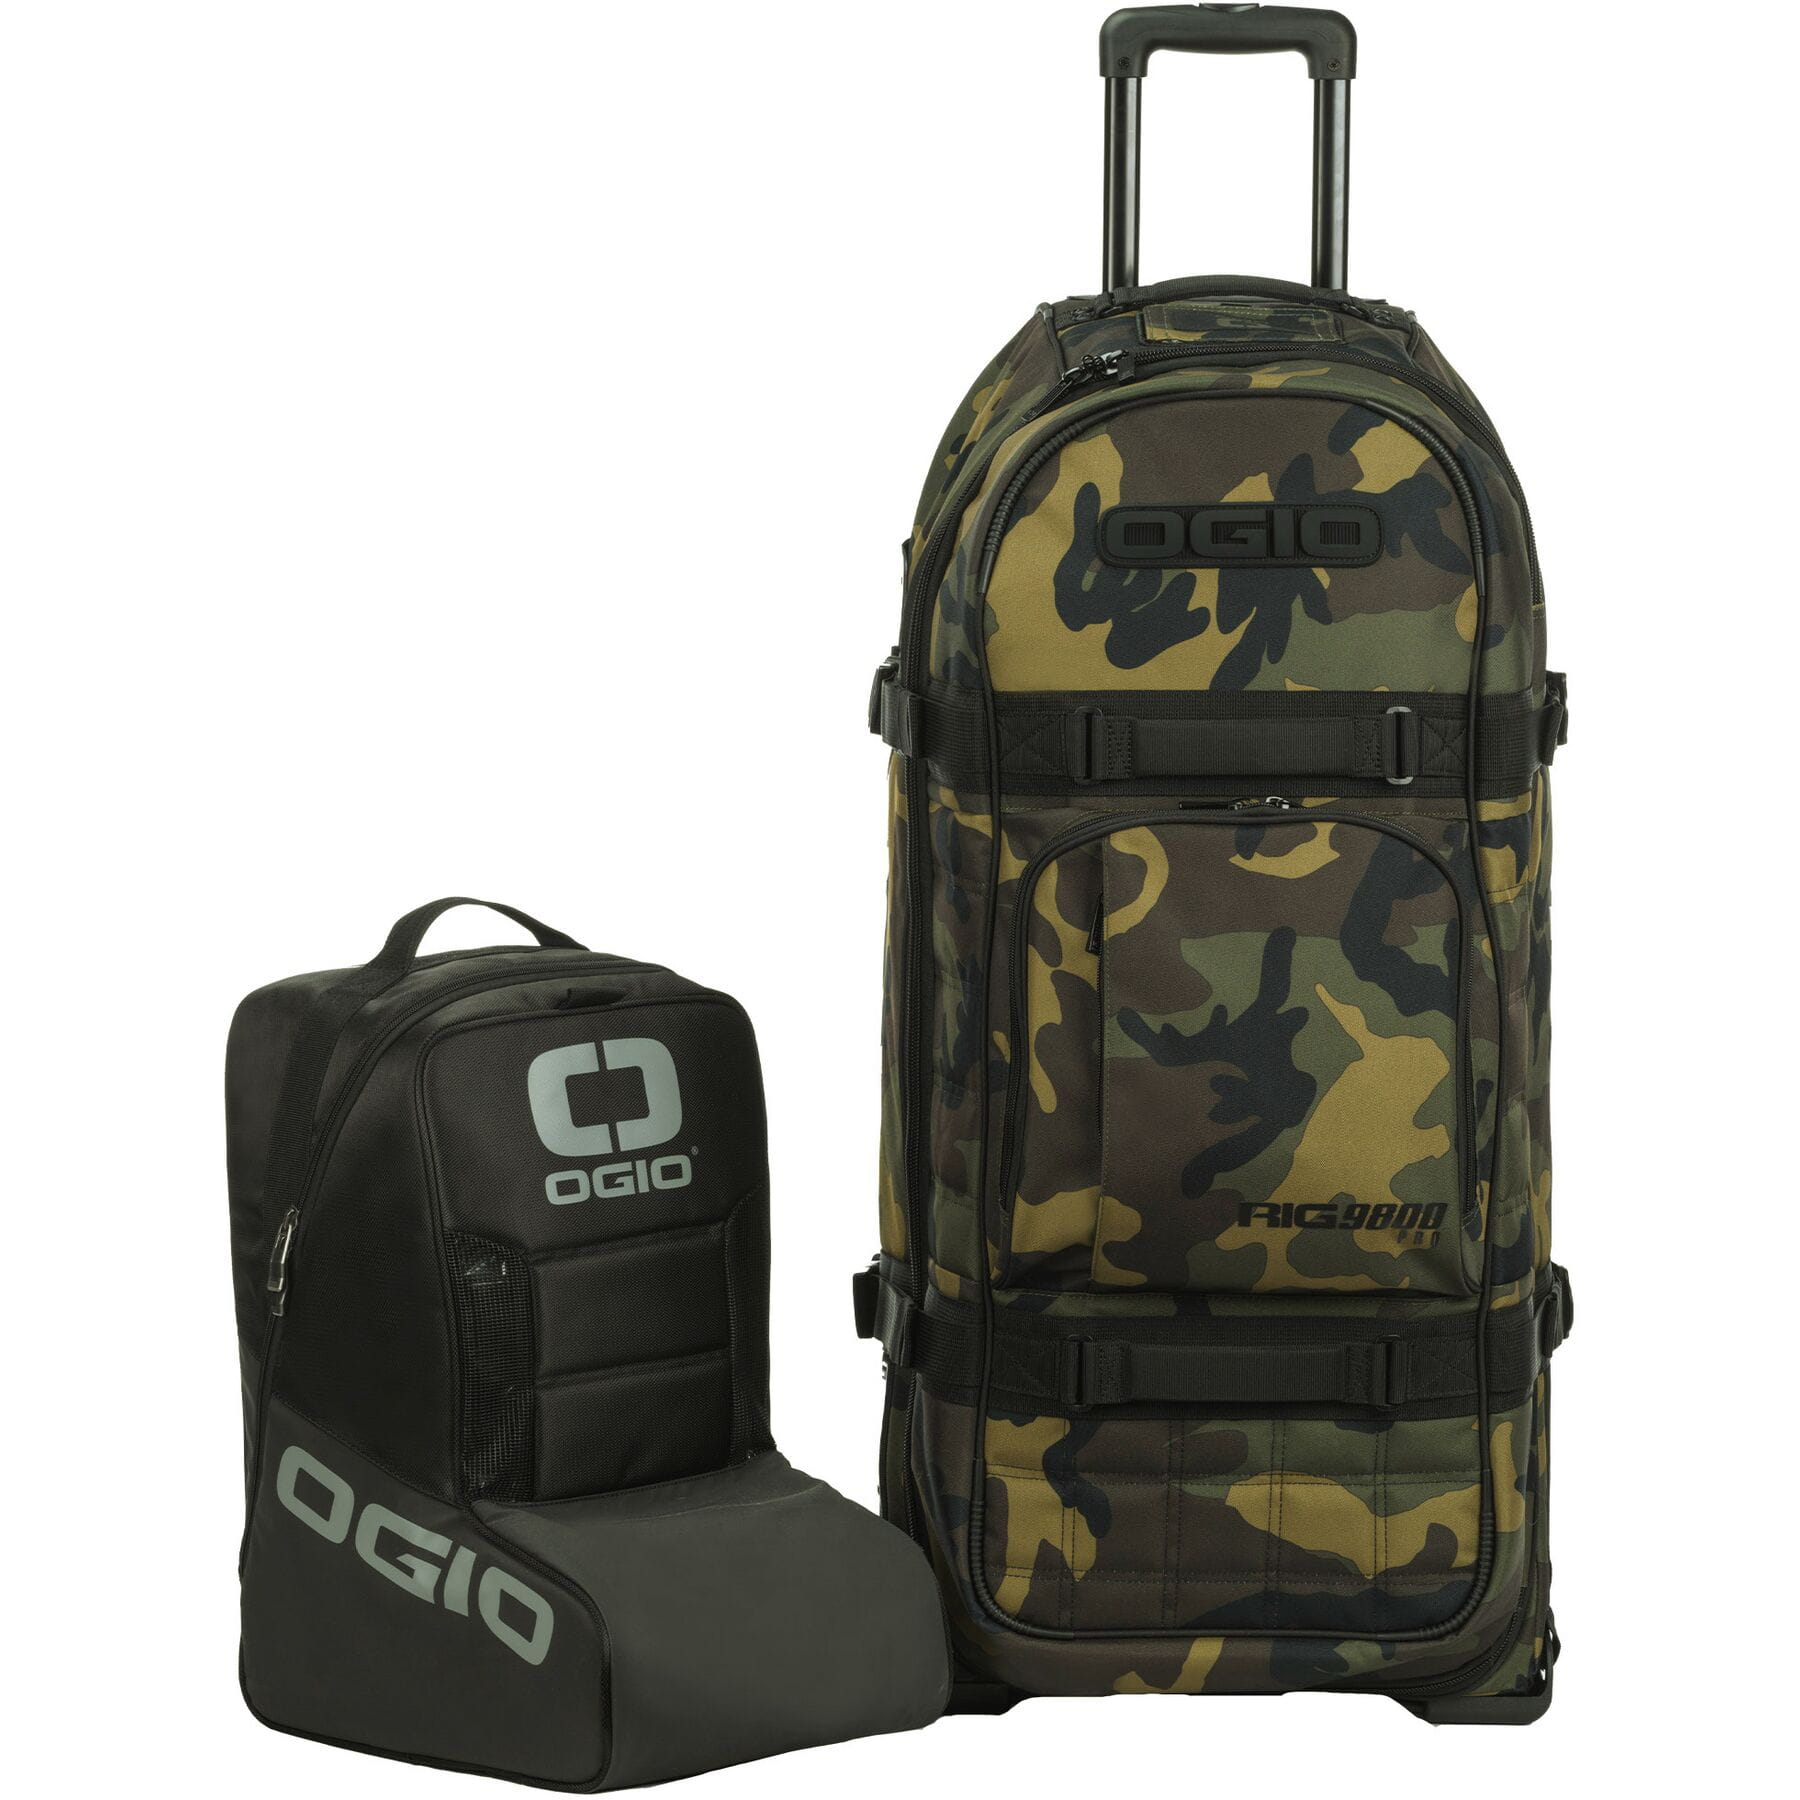 Rig 9800 PRO - Woody travel gear bag with durable wheels and unique wood grain design